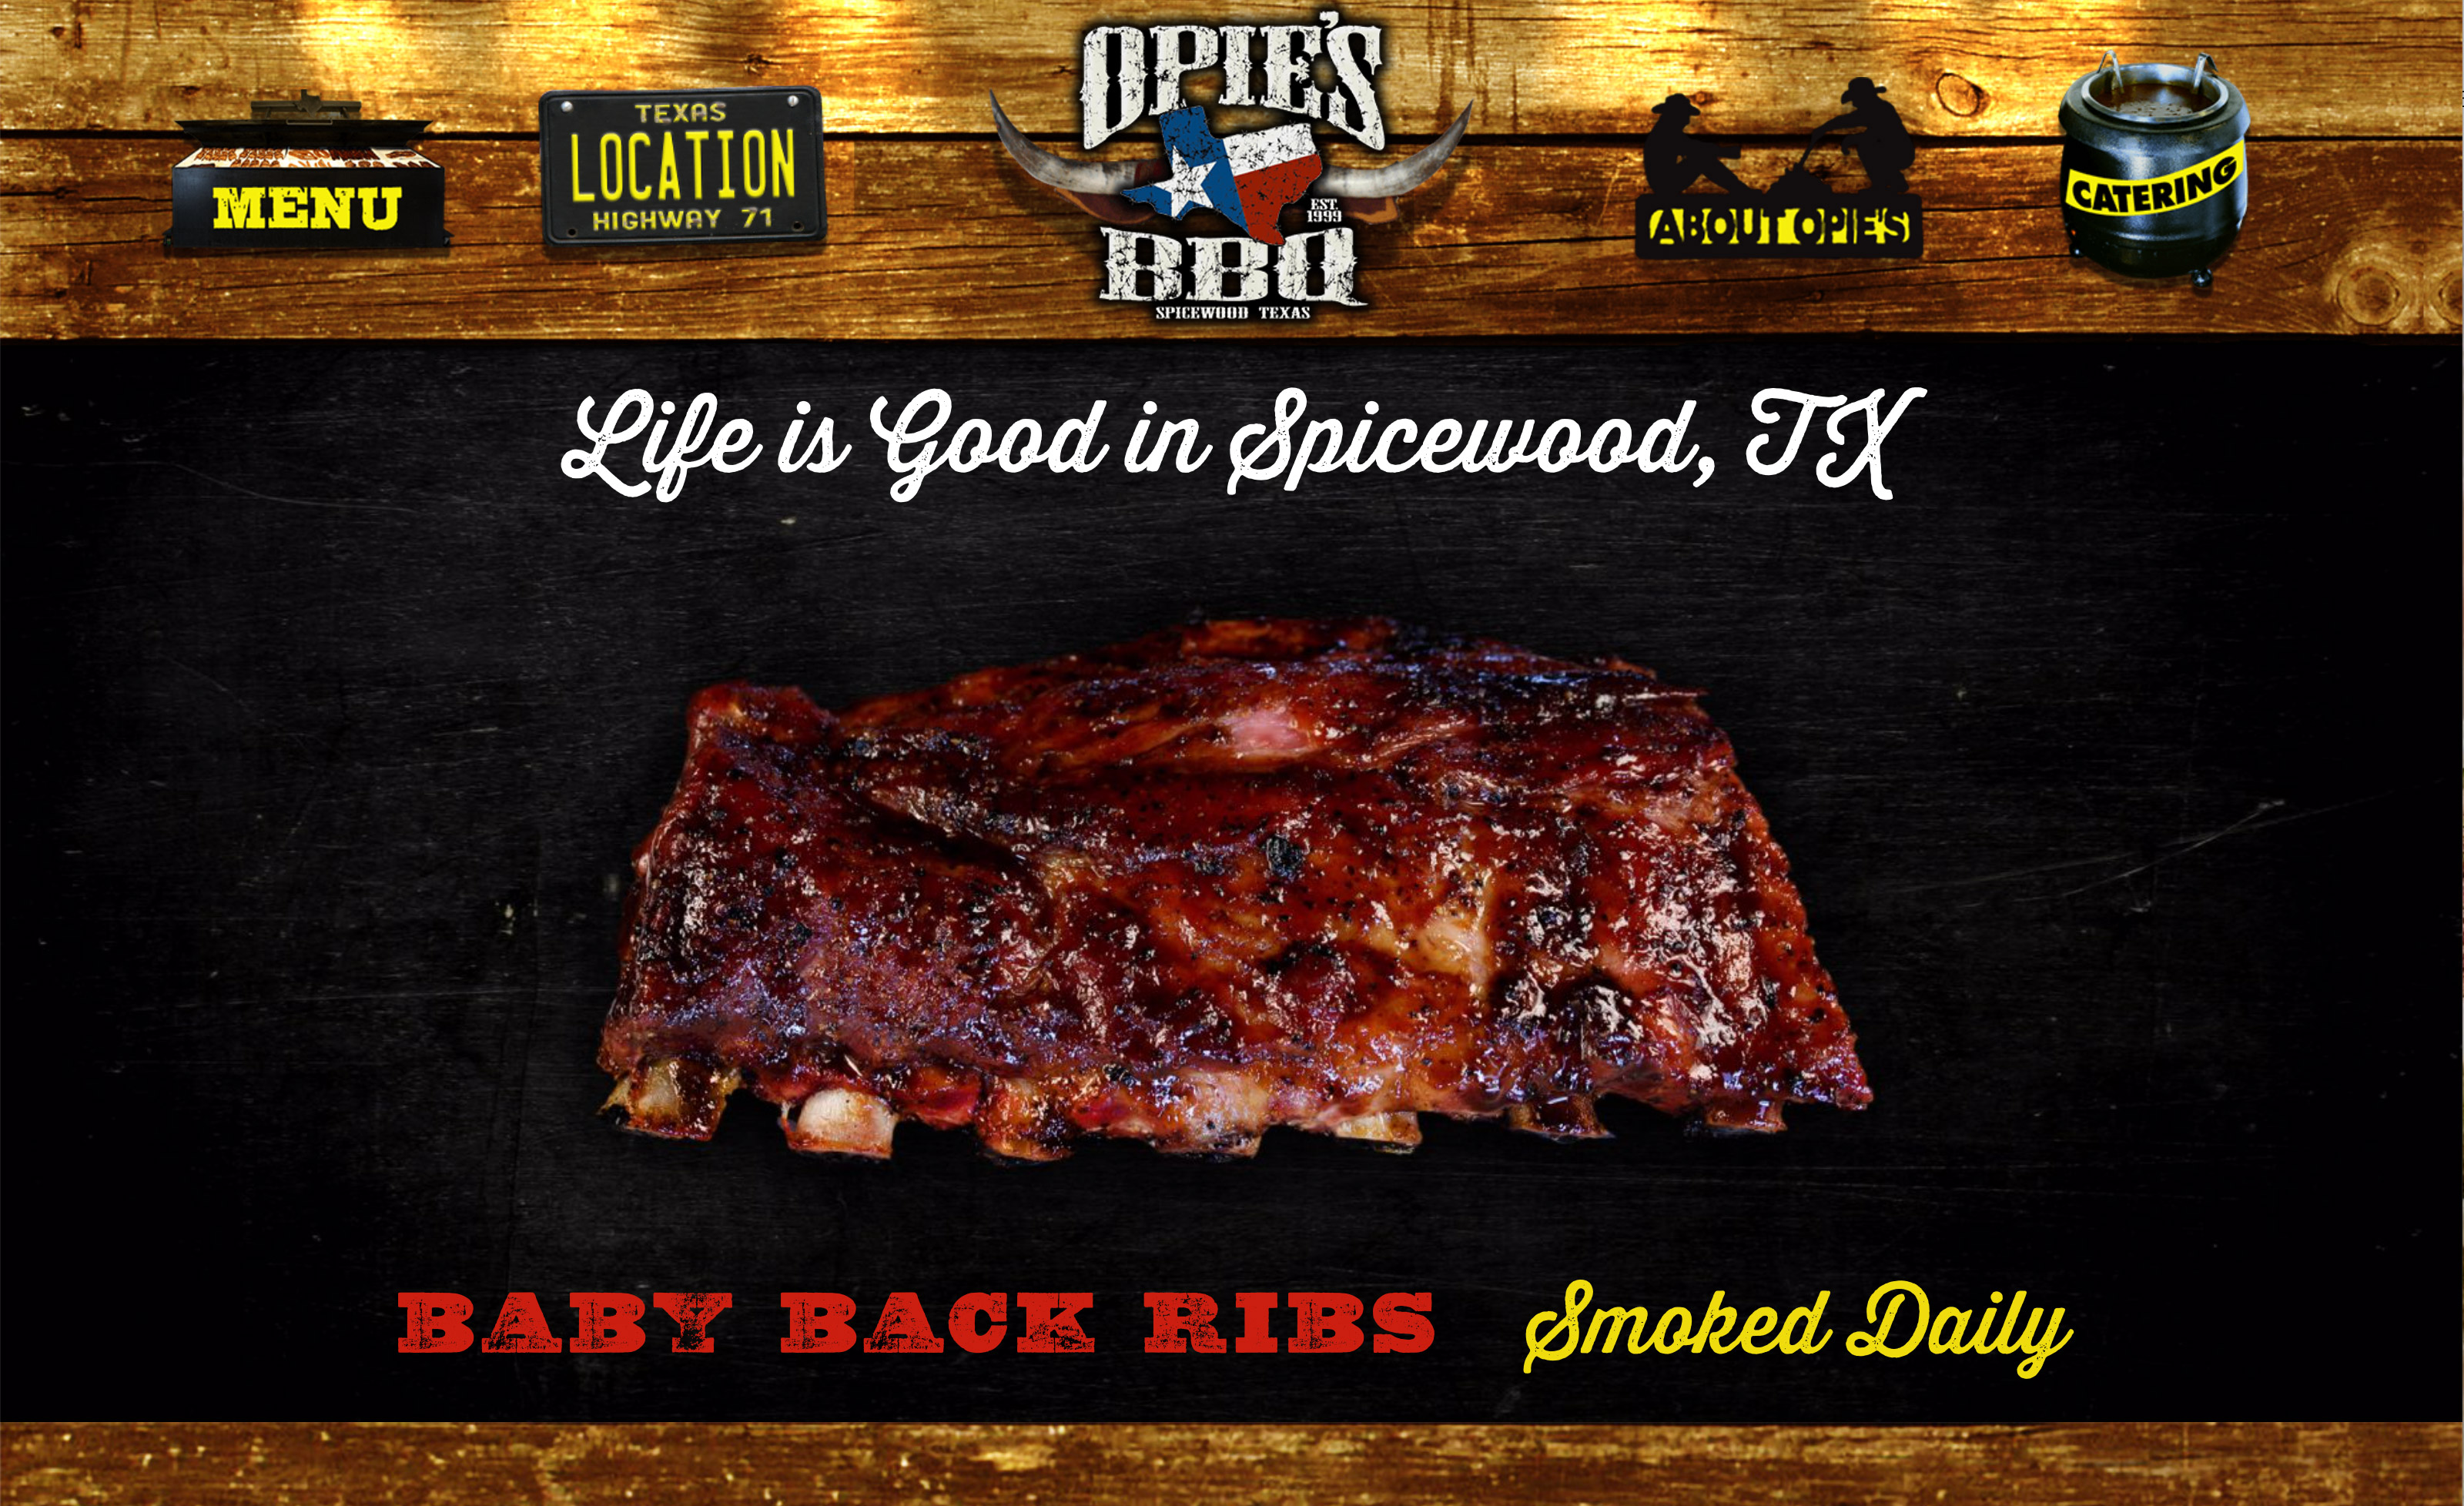 Opie’s Barbecue Image